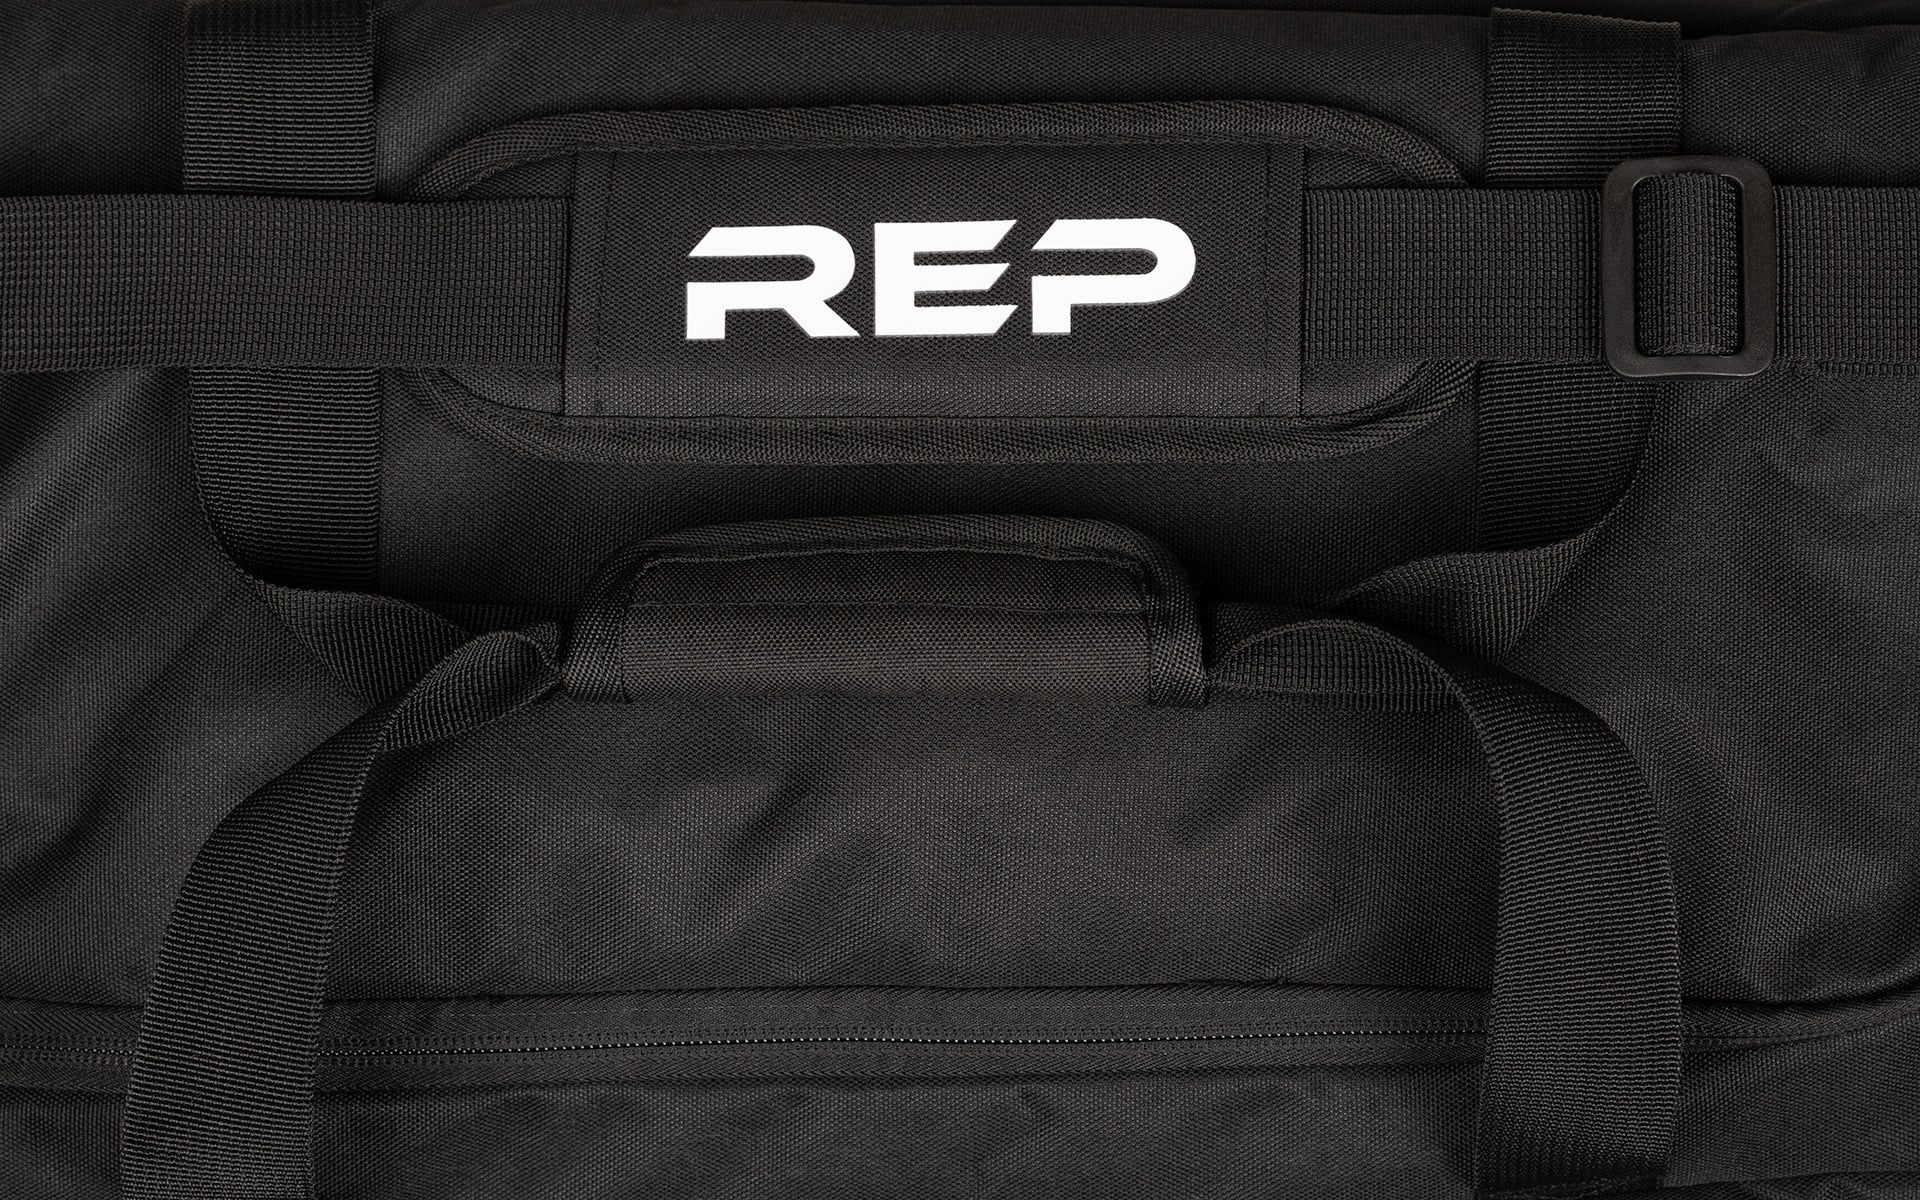 Black shoulder strap with white REP logo on the pad, along with black carrying handles